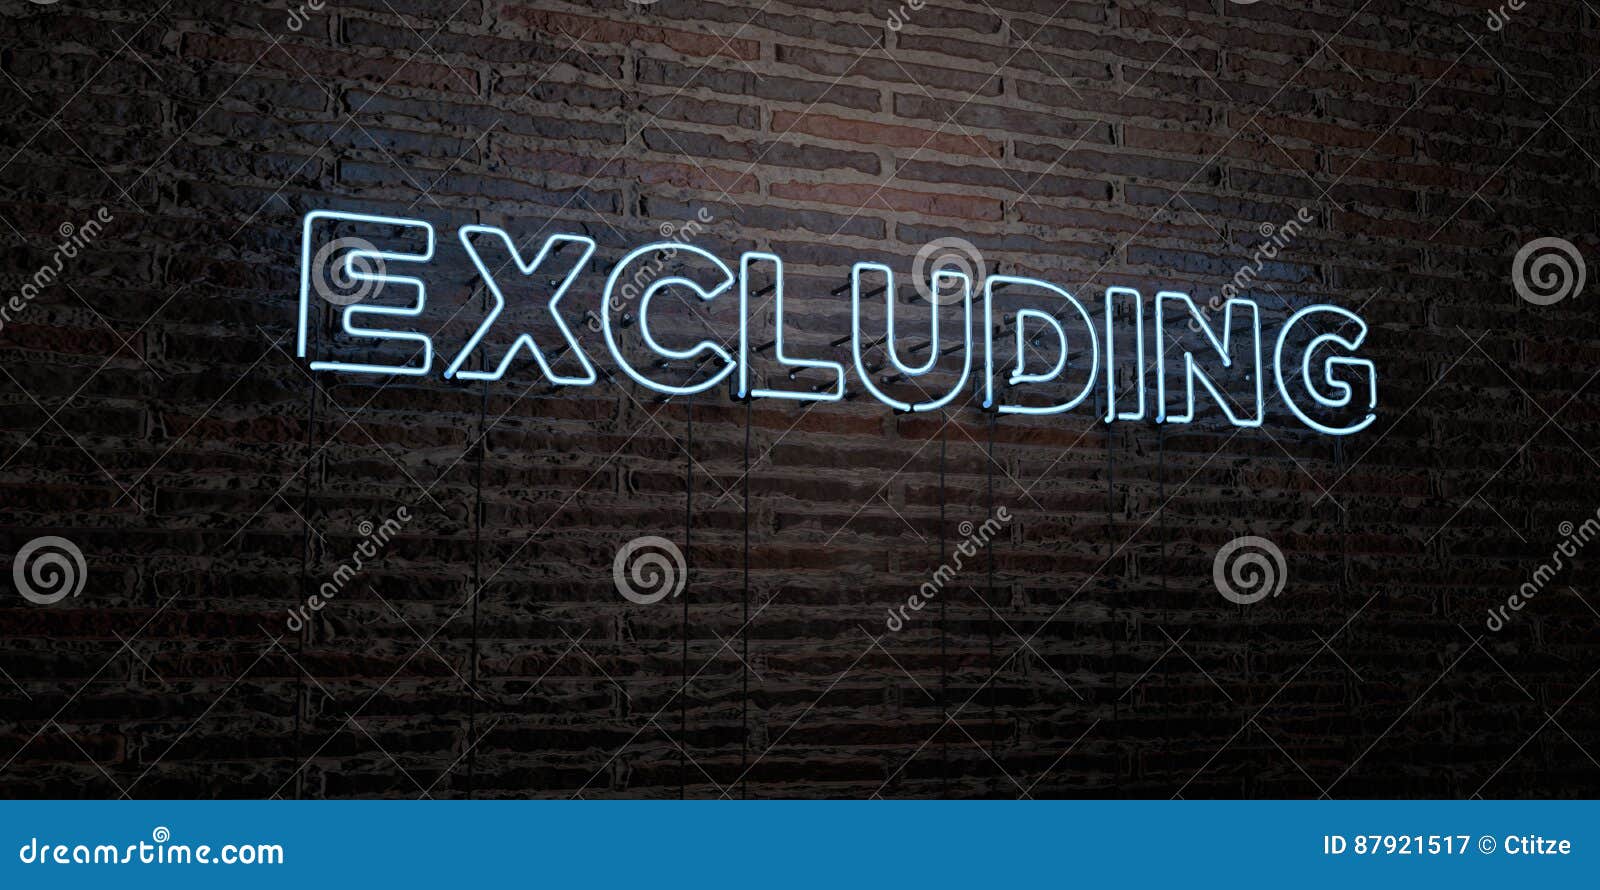 excluding -realistic neon sign on brick wall background - 3d rendered royalty free stock image